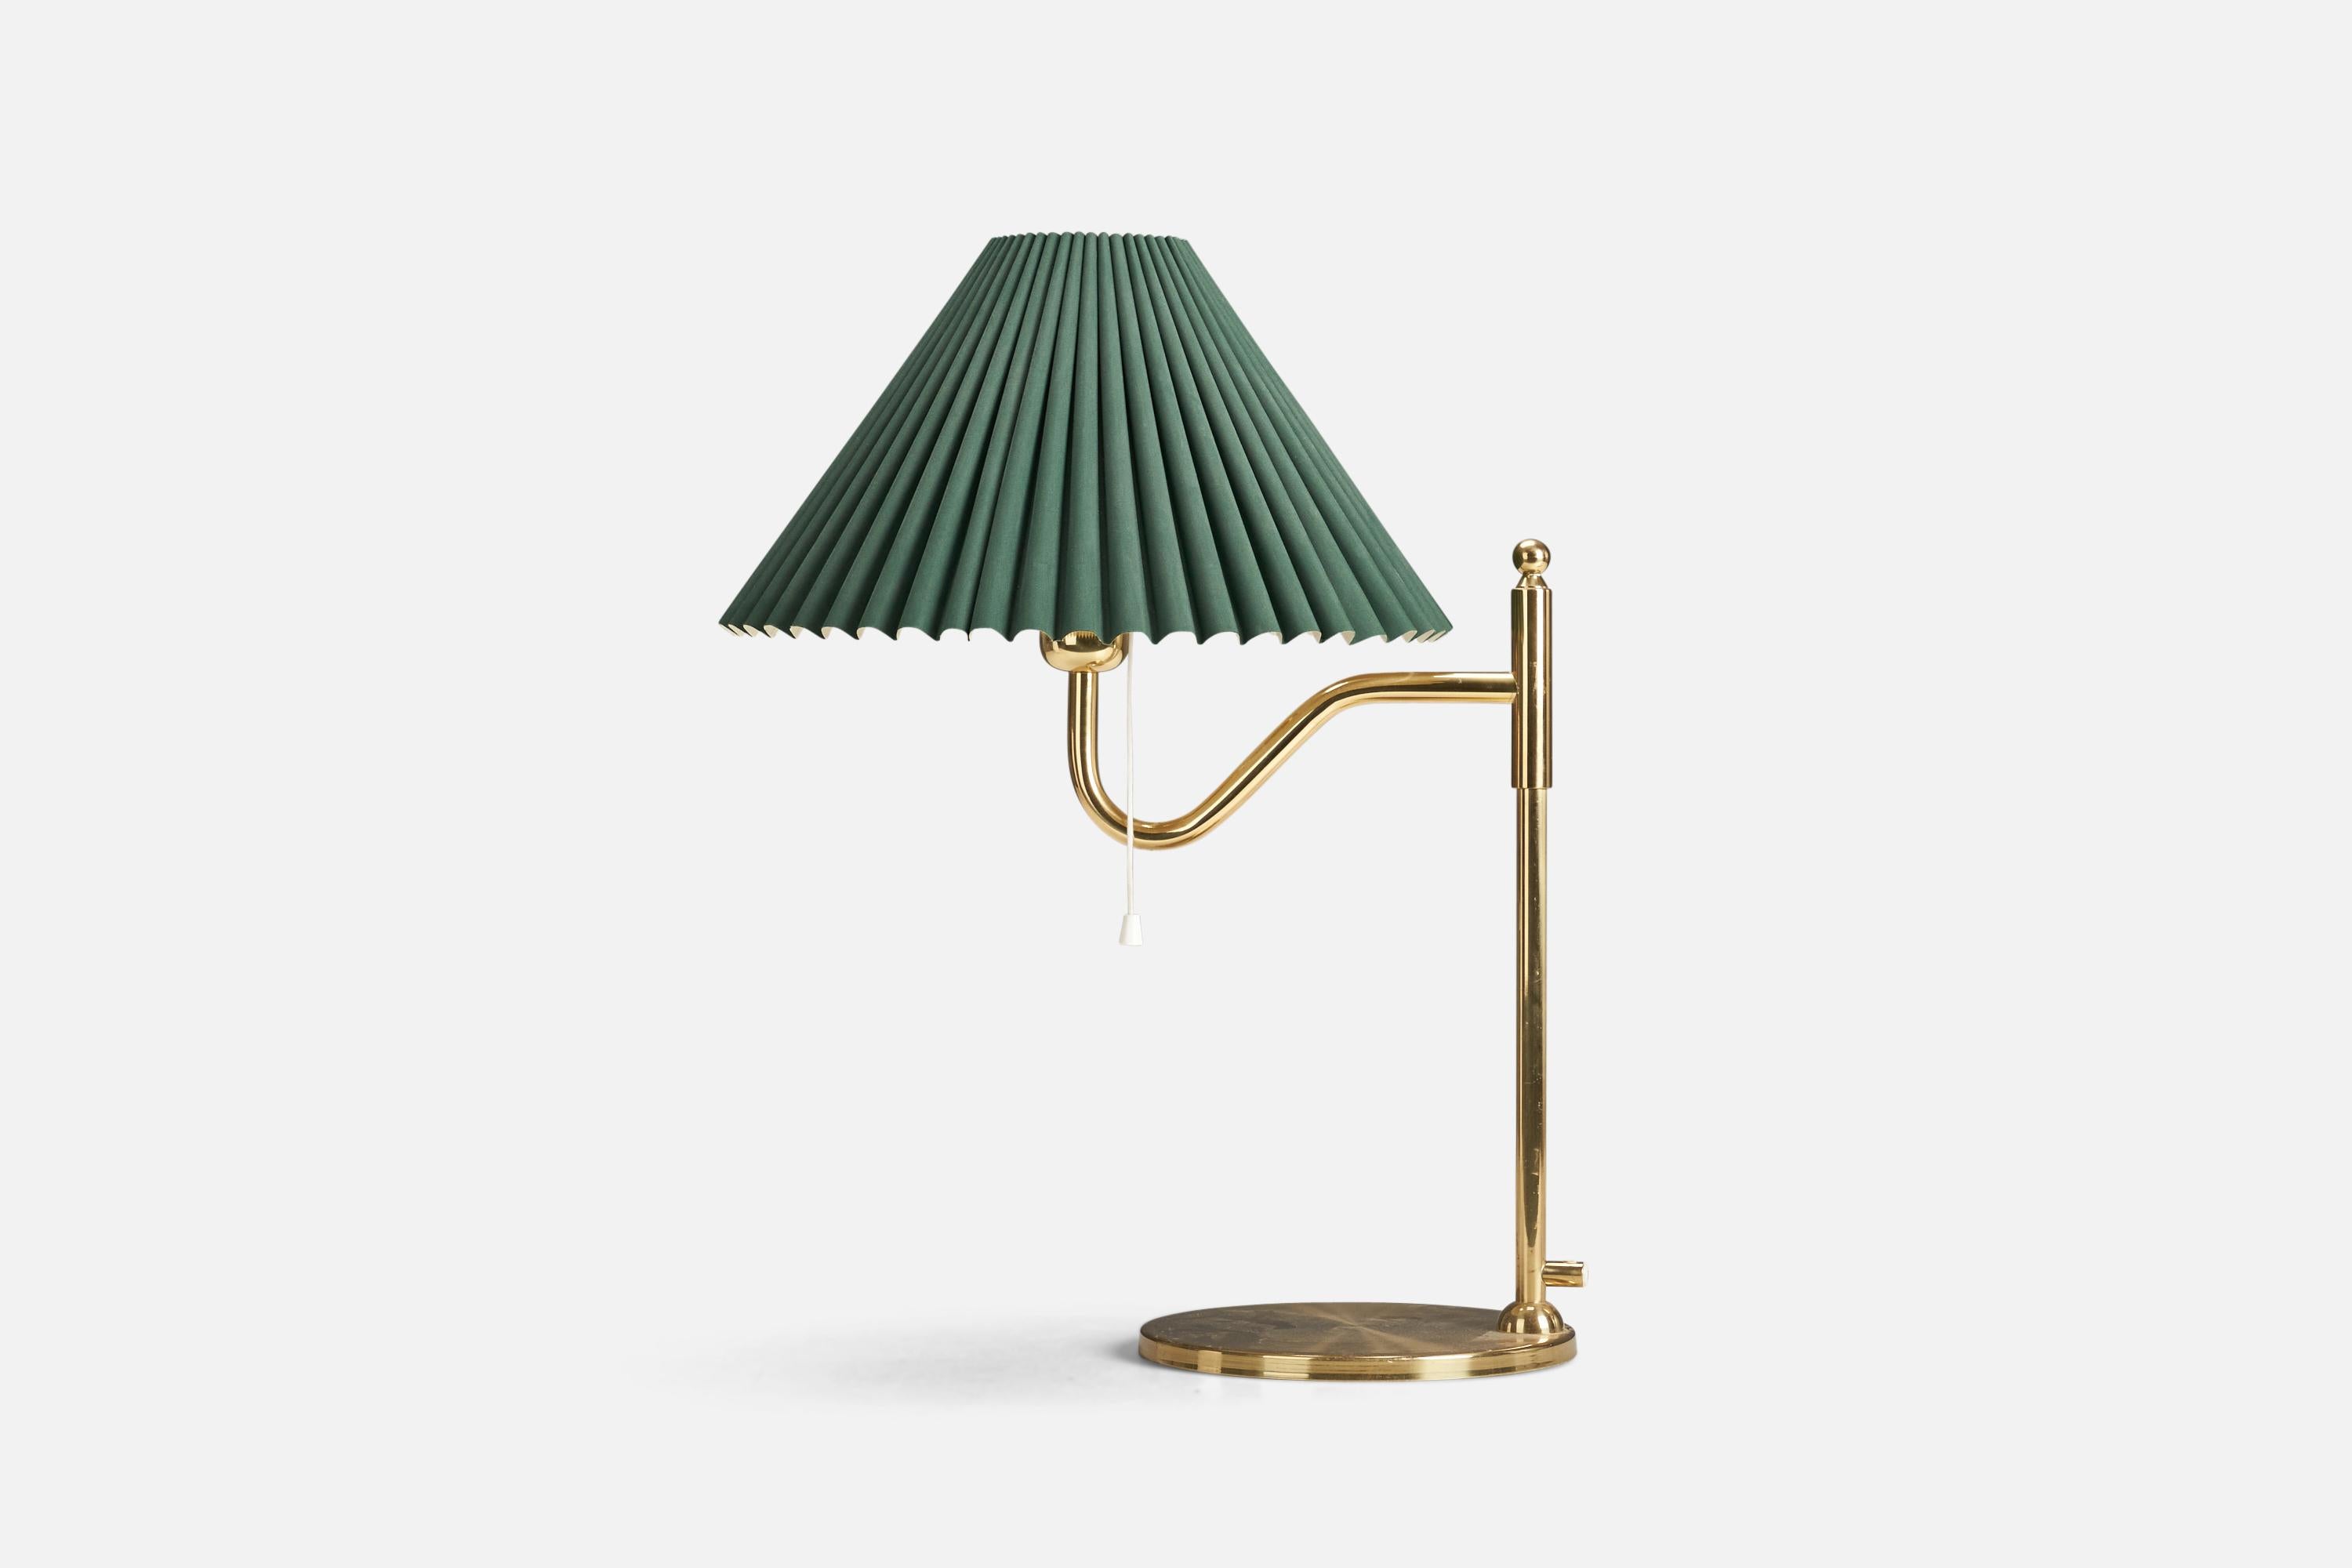 A brass and paper table lamp designed and produced by a Swedish Designer, Sweden, 1970s.

Socket takes standard E-26 medium base bulb.

The maximum wattage stated on the fixture is 60.